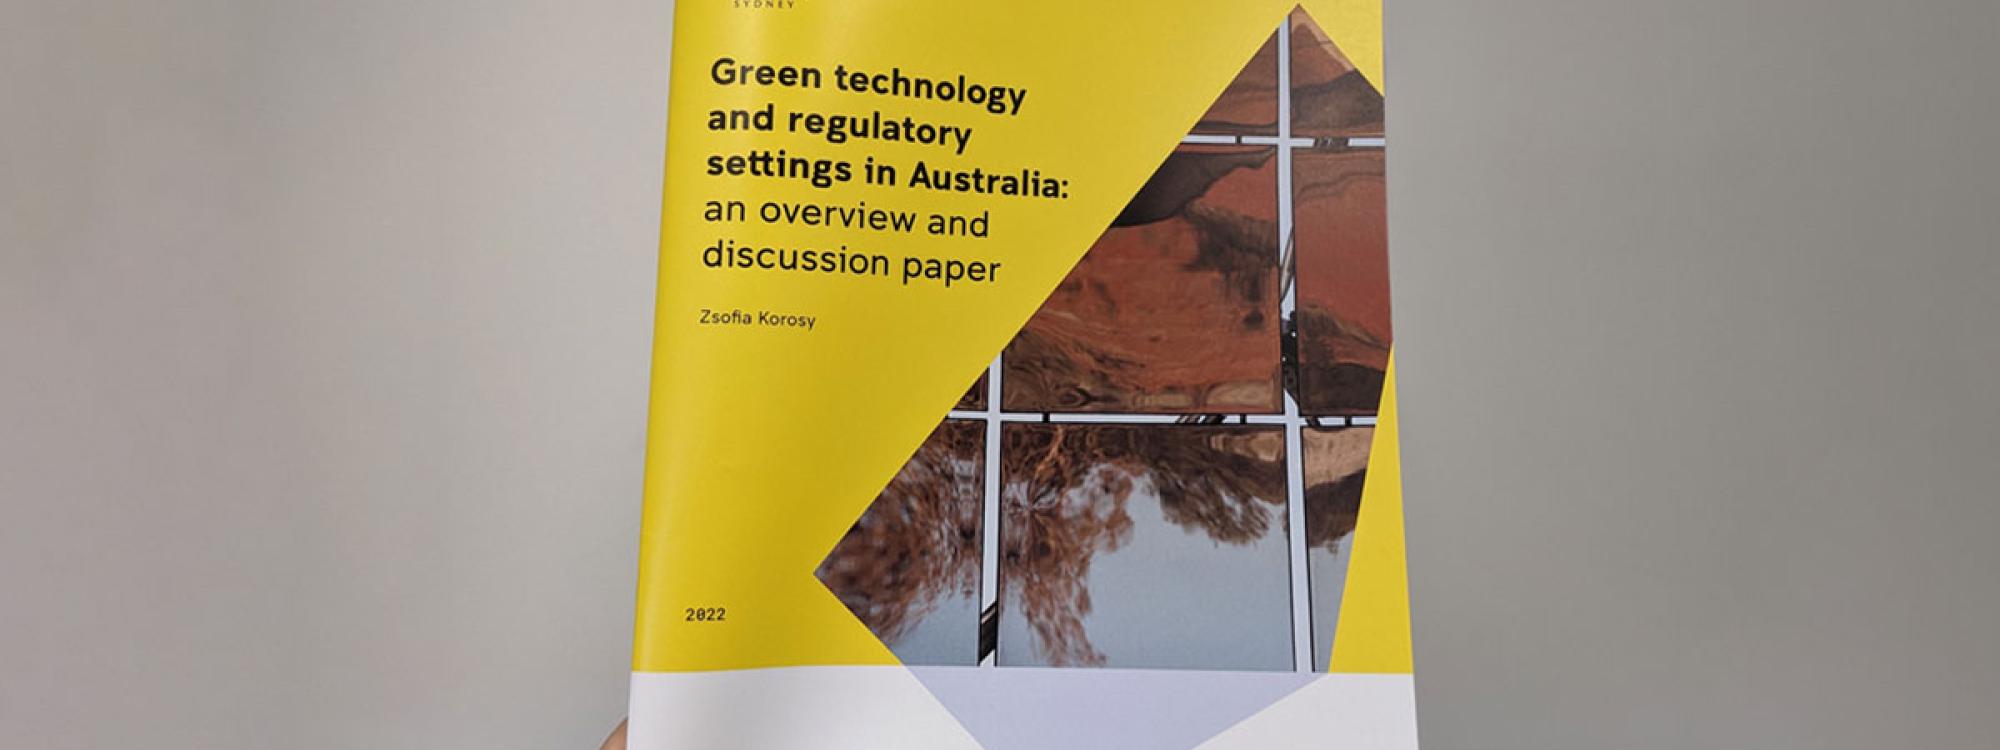 Greentech discussion paper